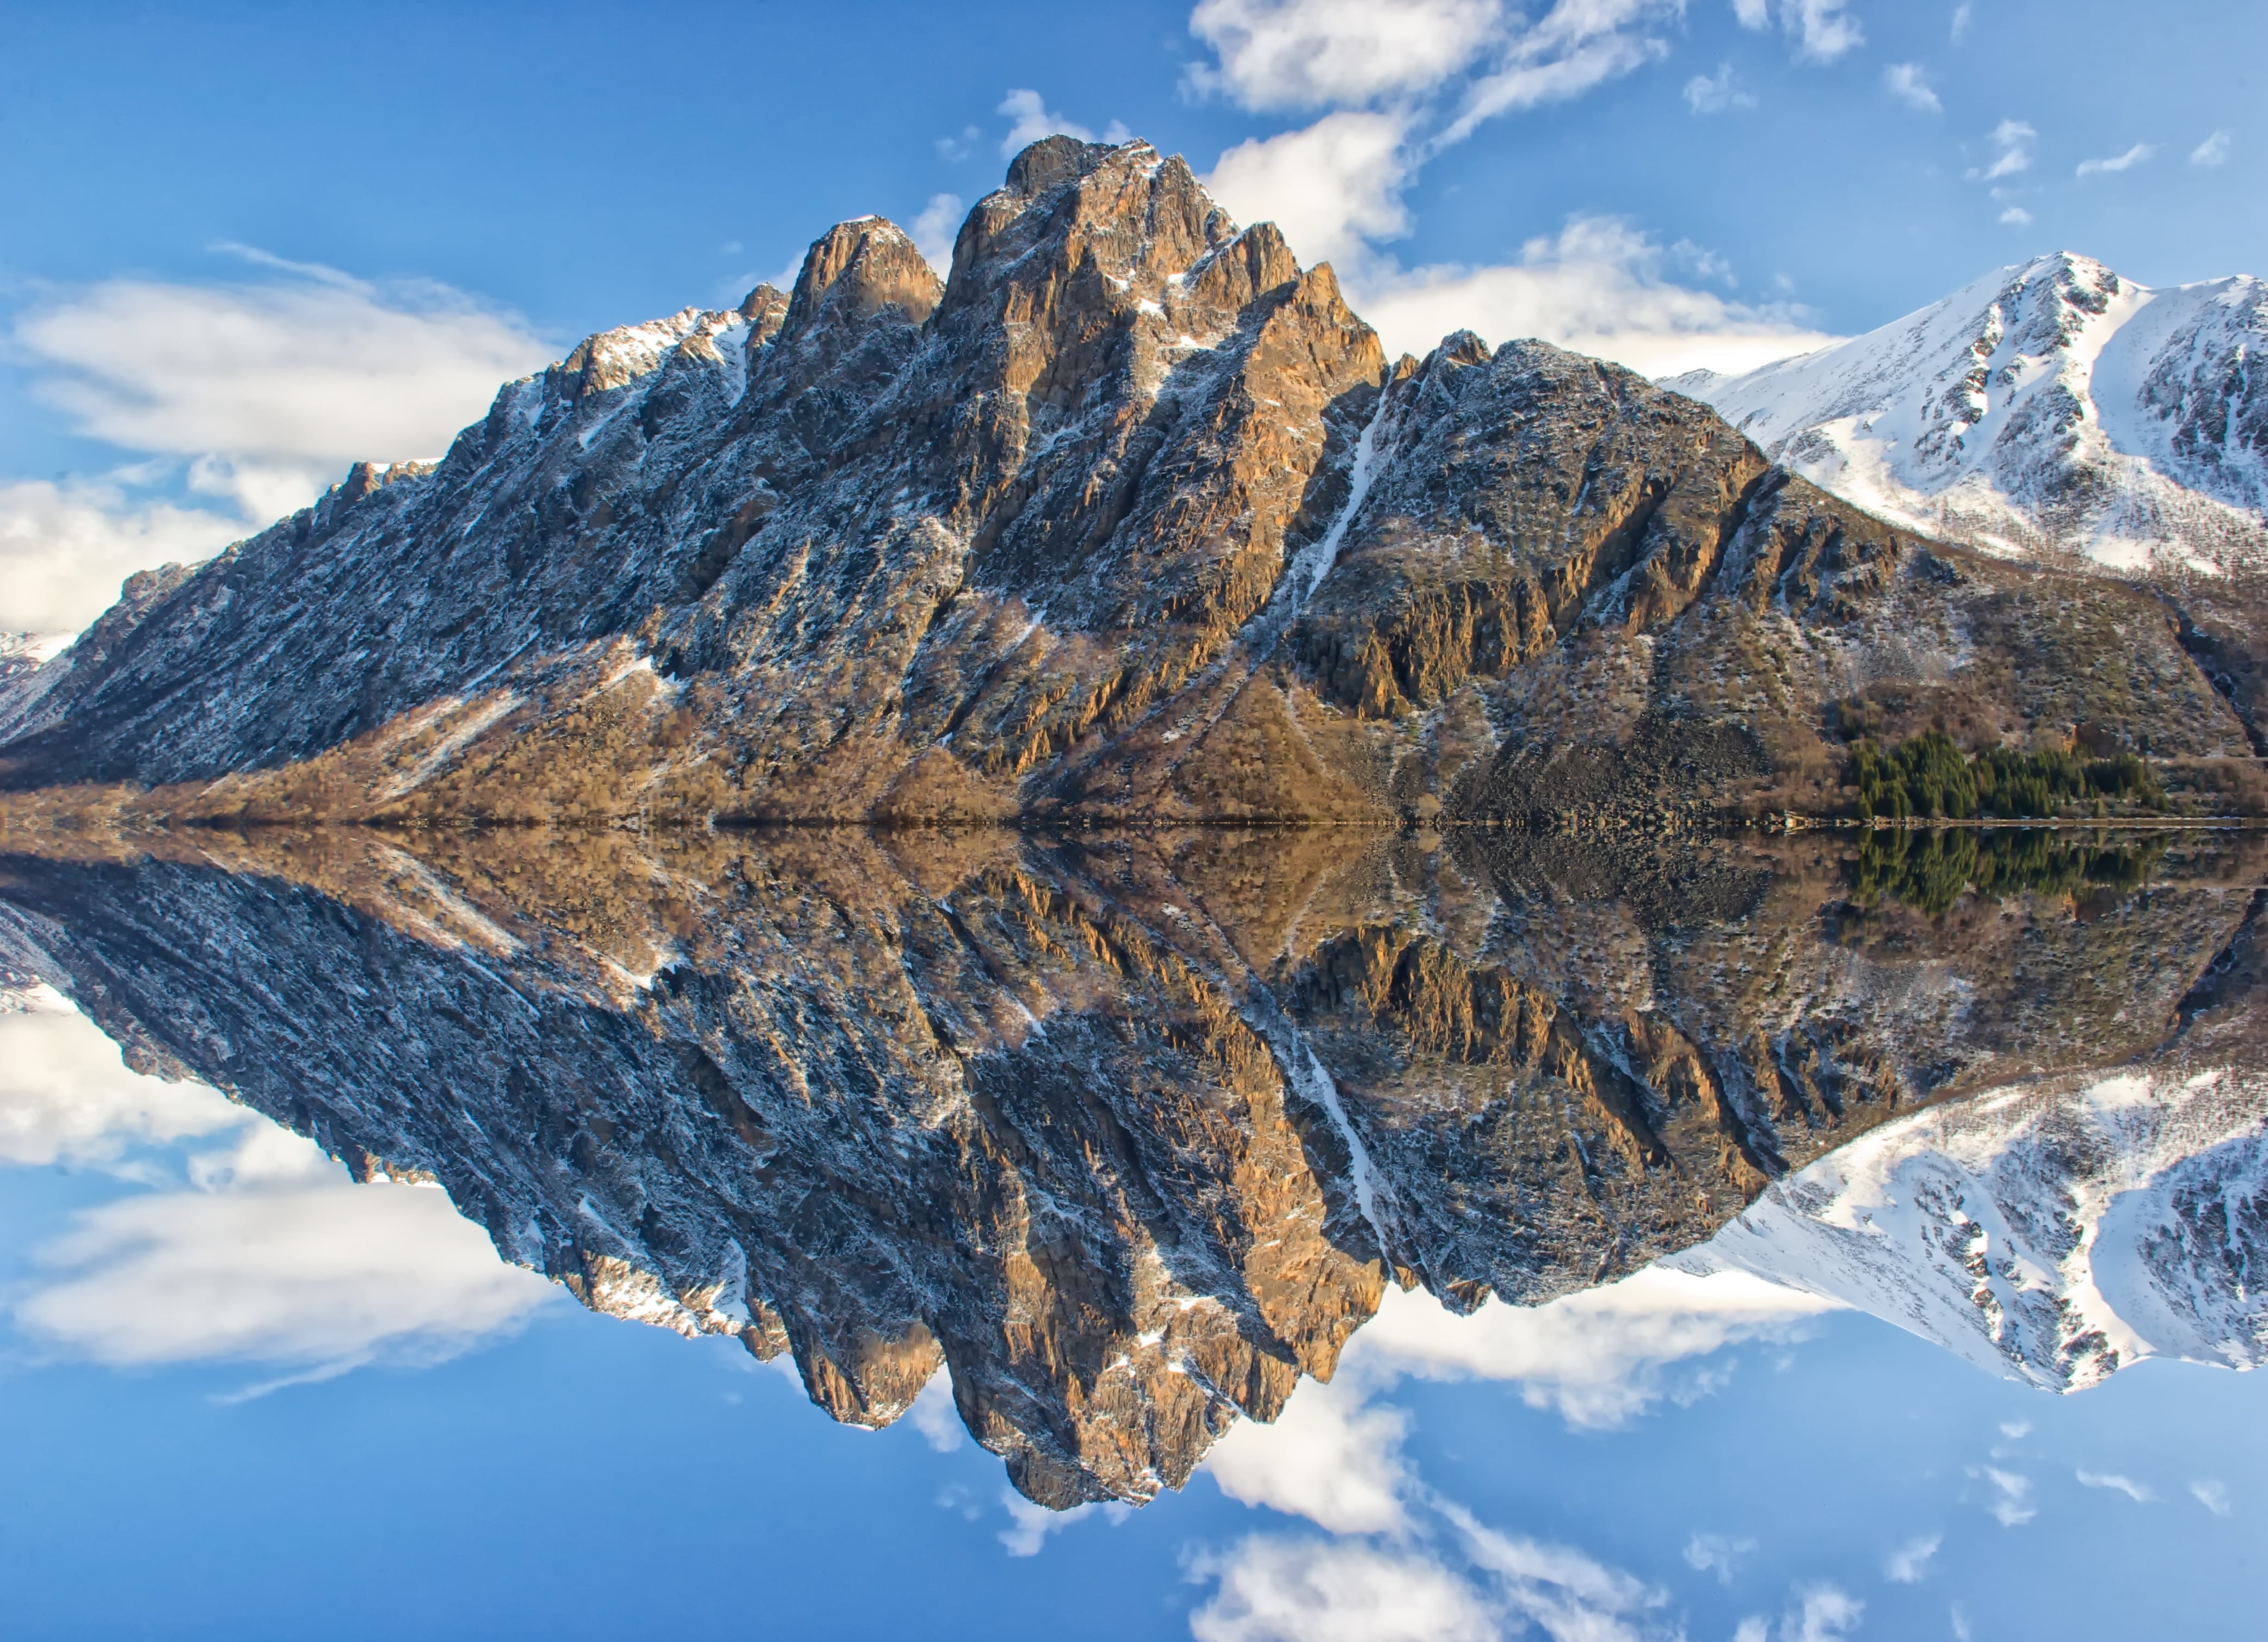 Landscape Reflection Photography Of Snowy Mountain Surrounded With Body